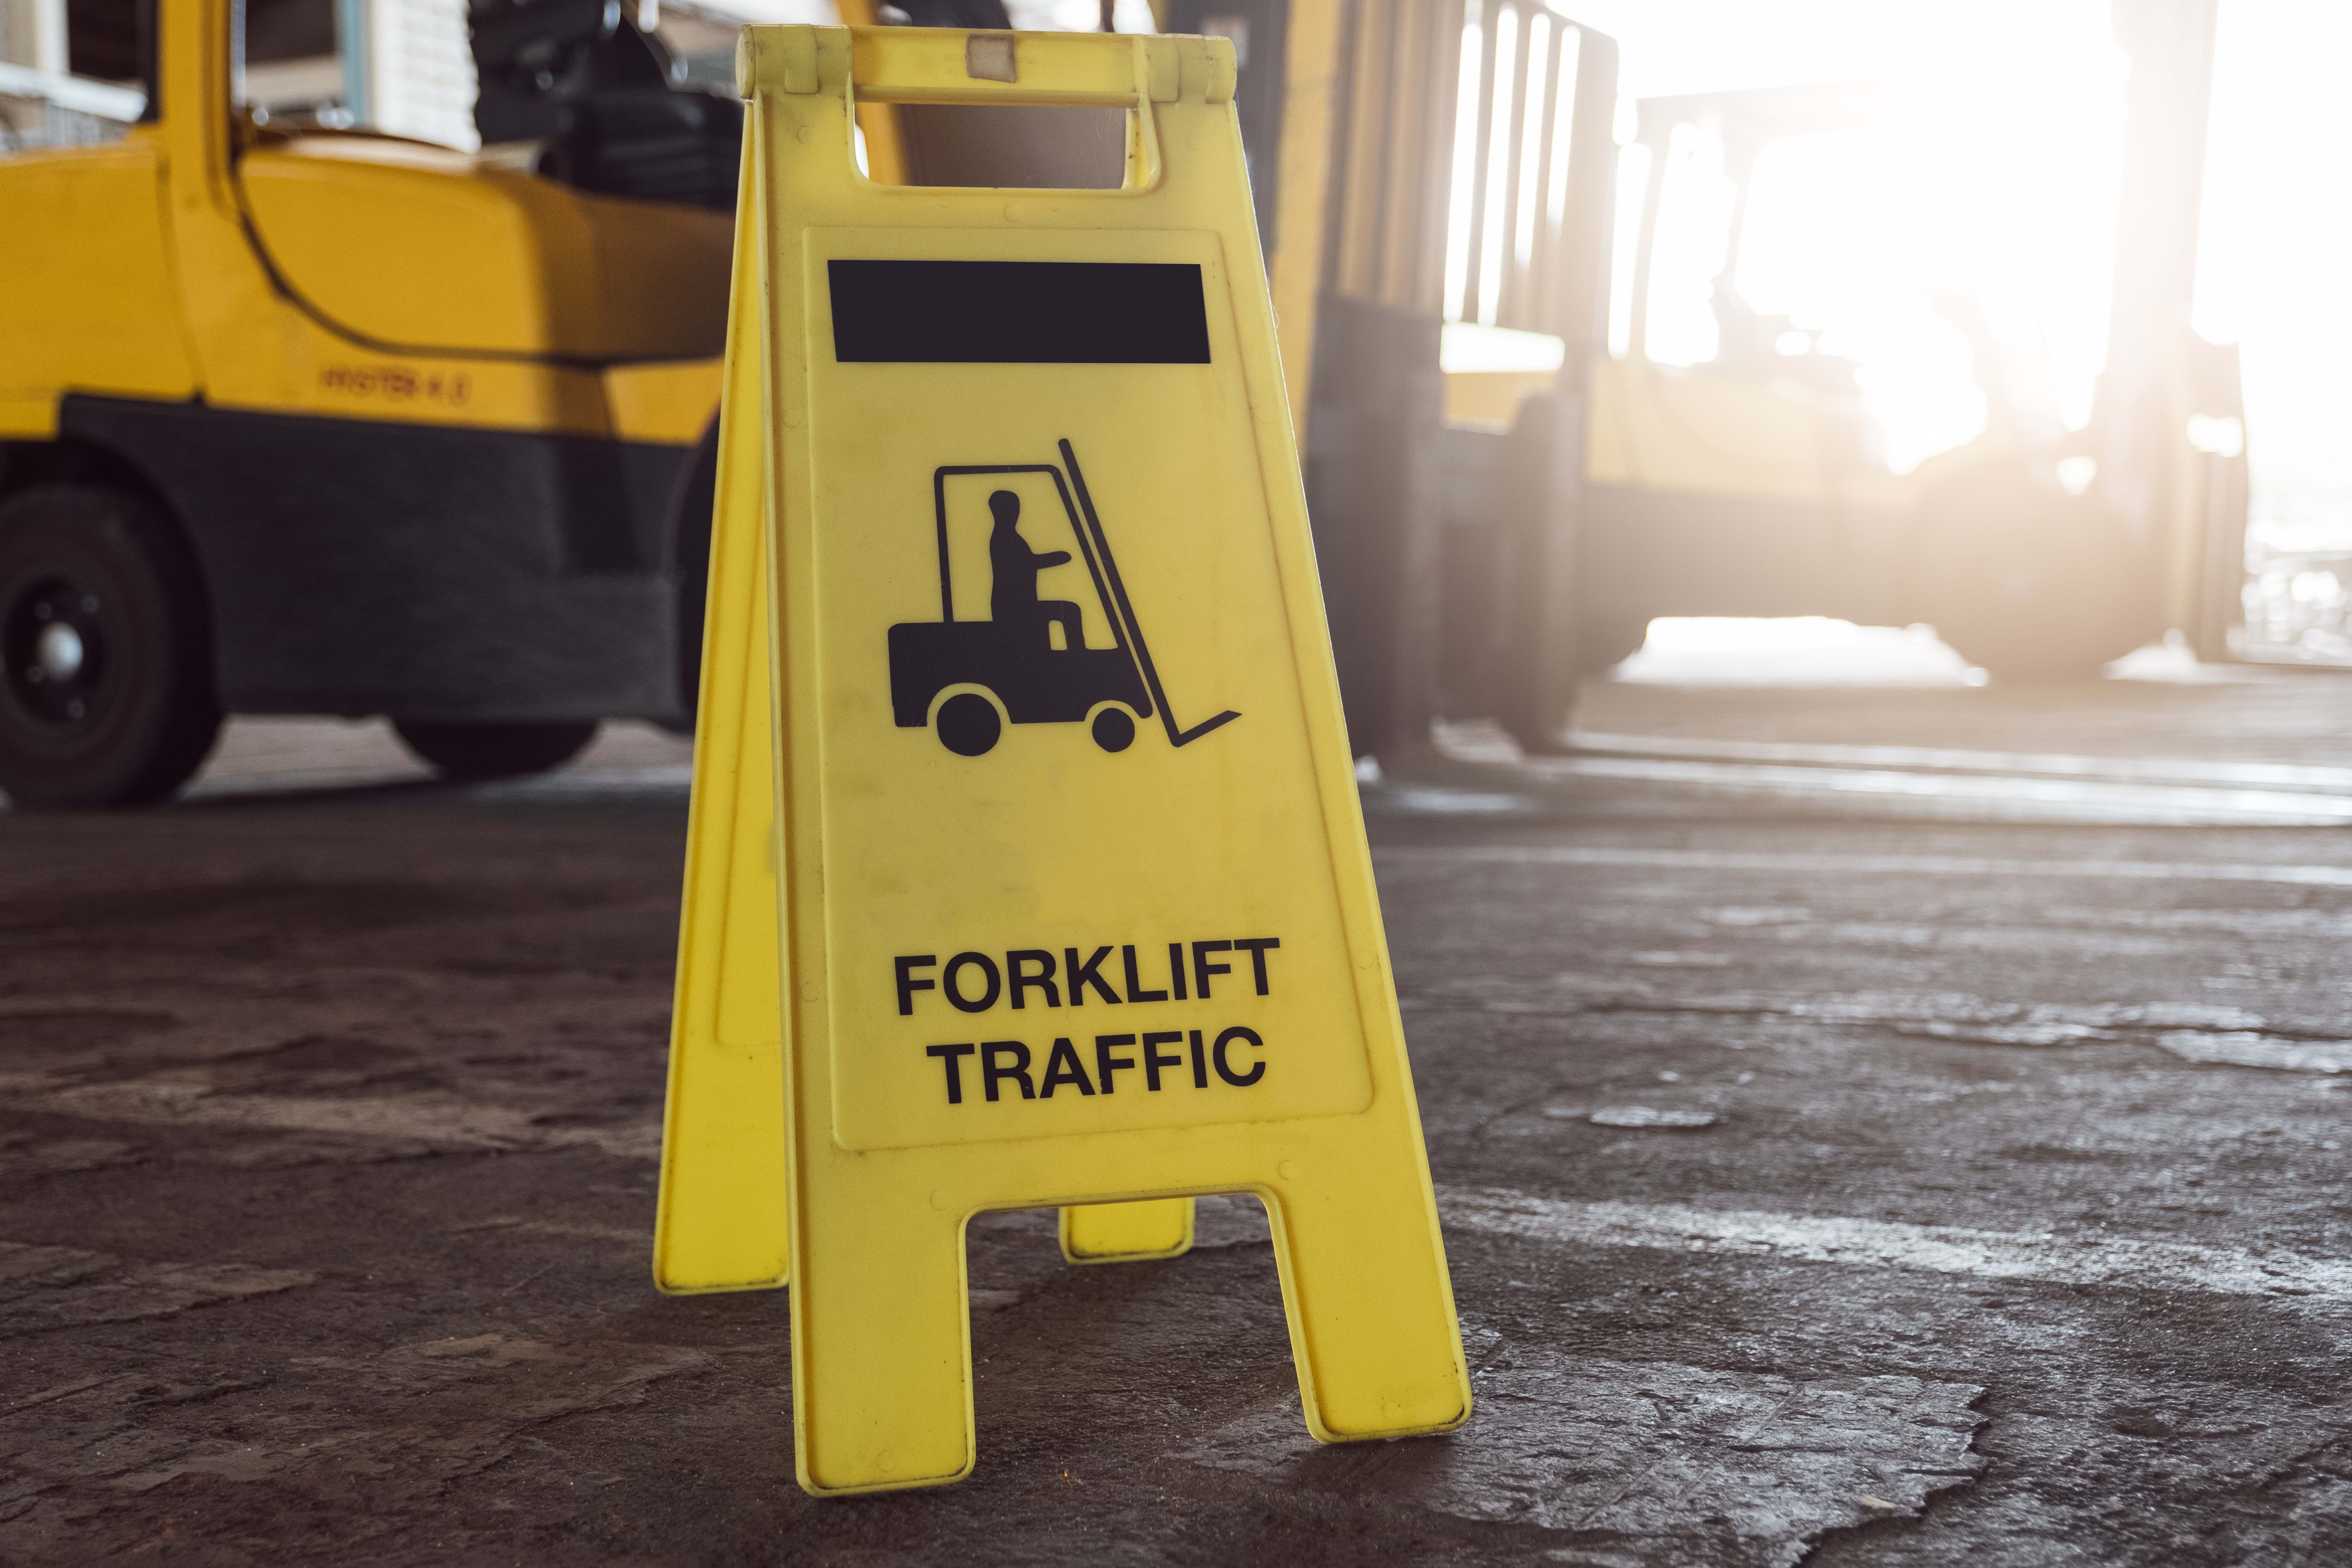 Forklift traffic sign in a warehouse